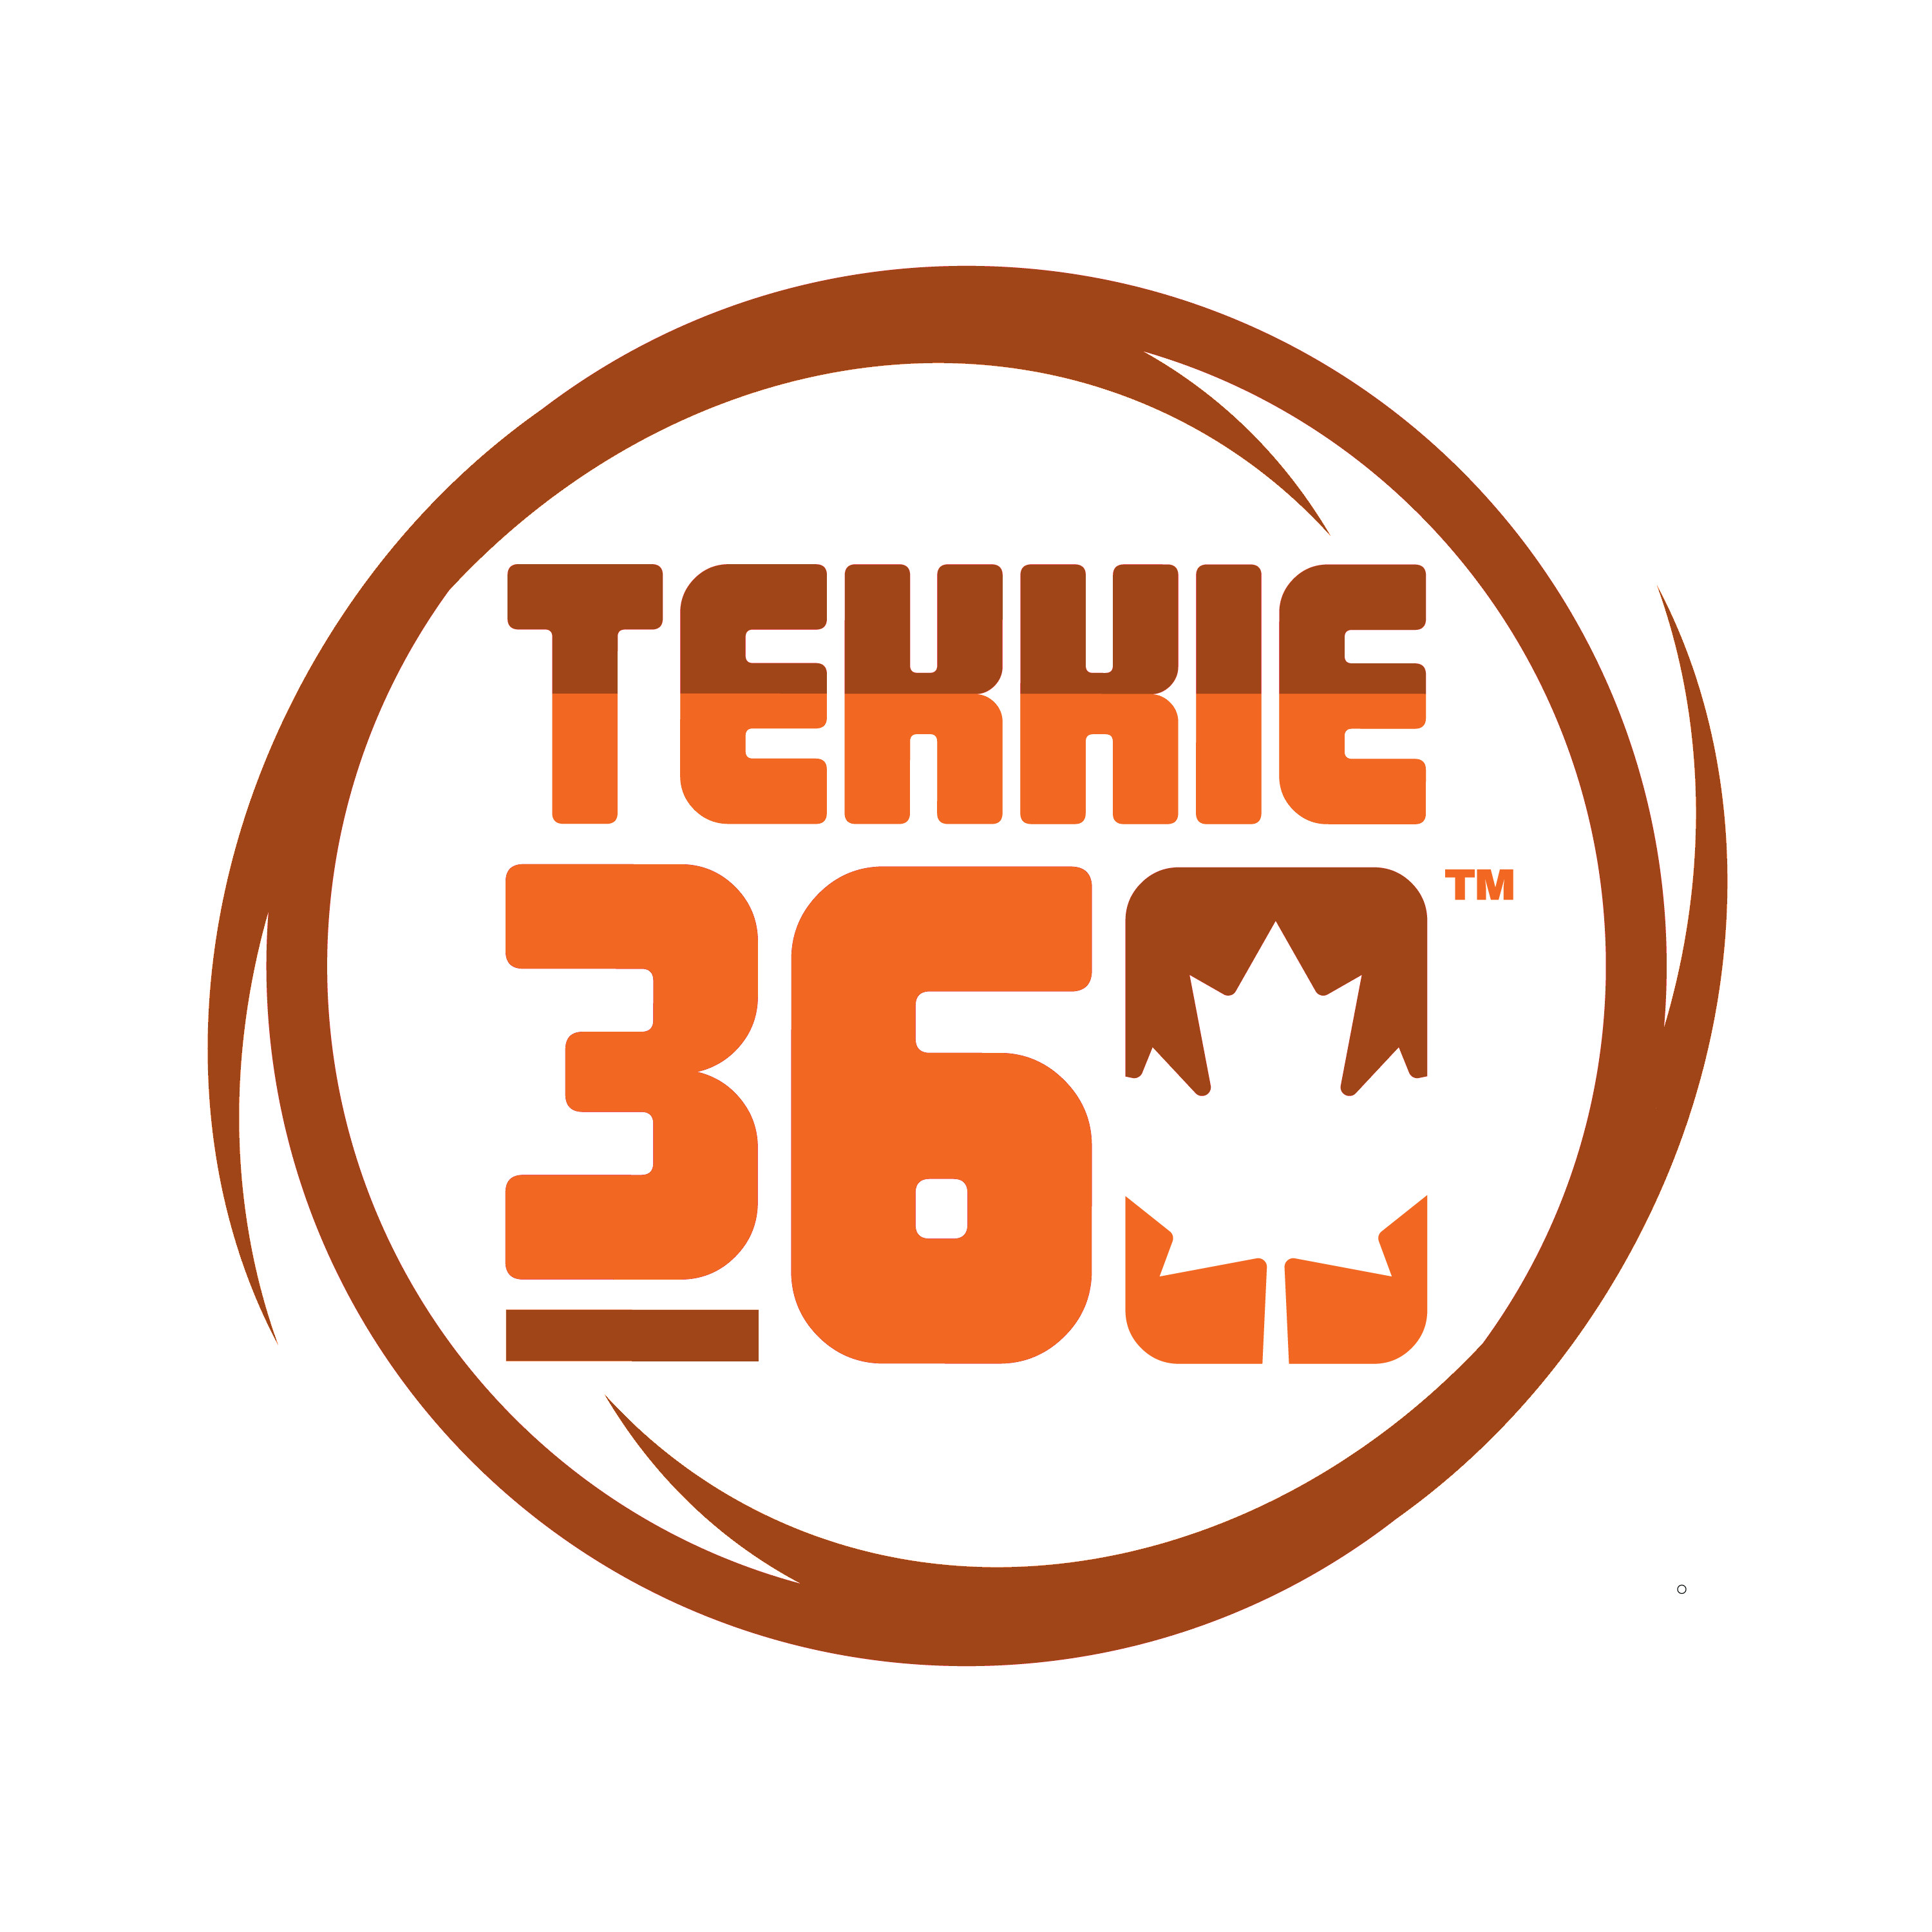 TEKKIE 360 | Canadian Marketing Agency | Marketing Without Strings™